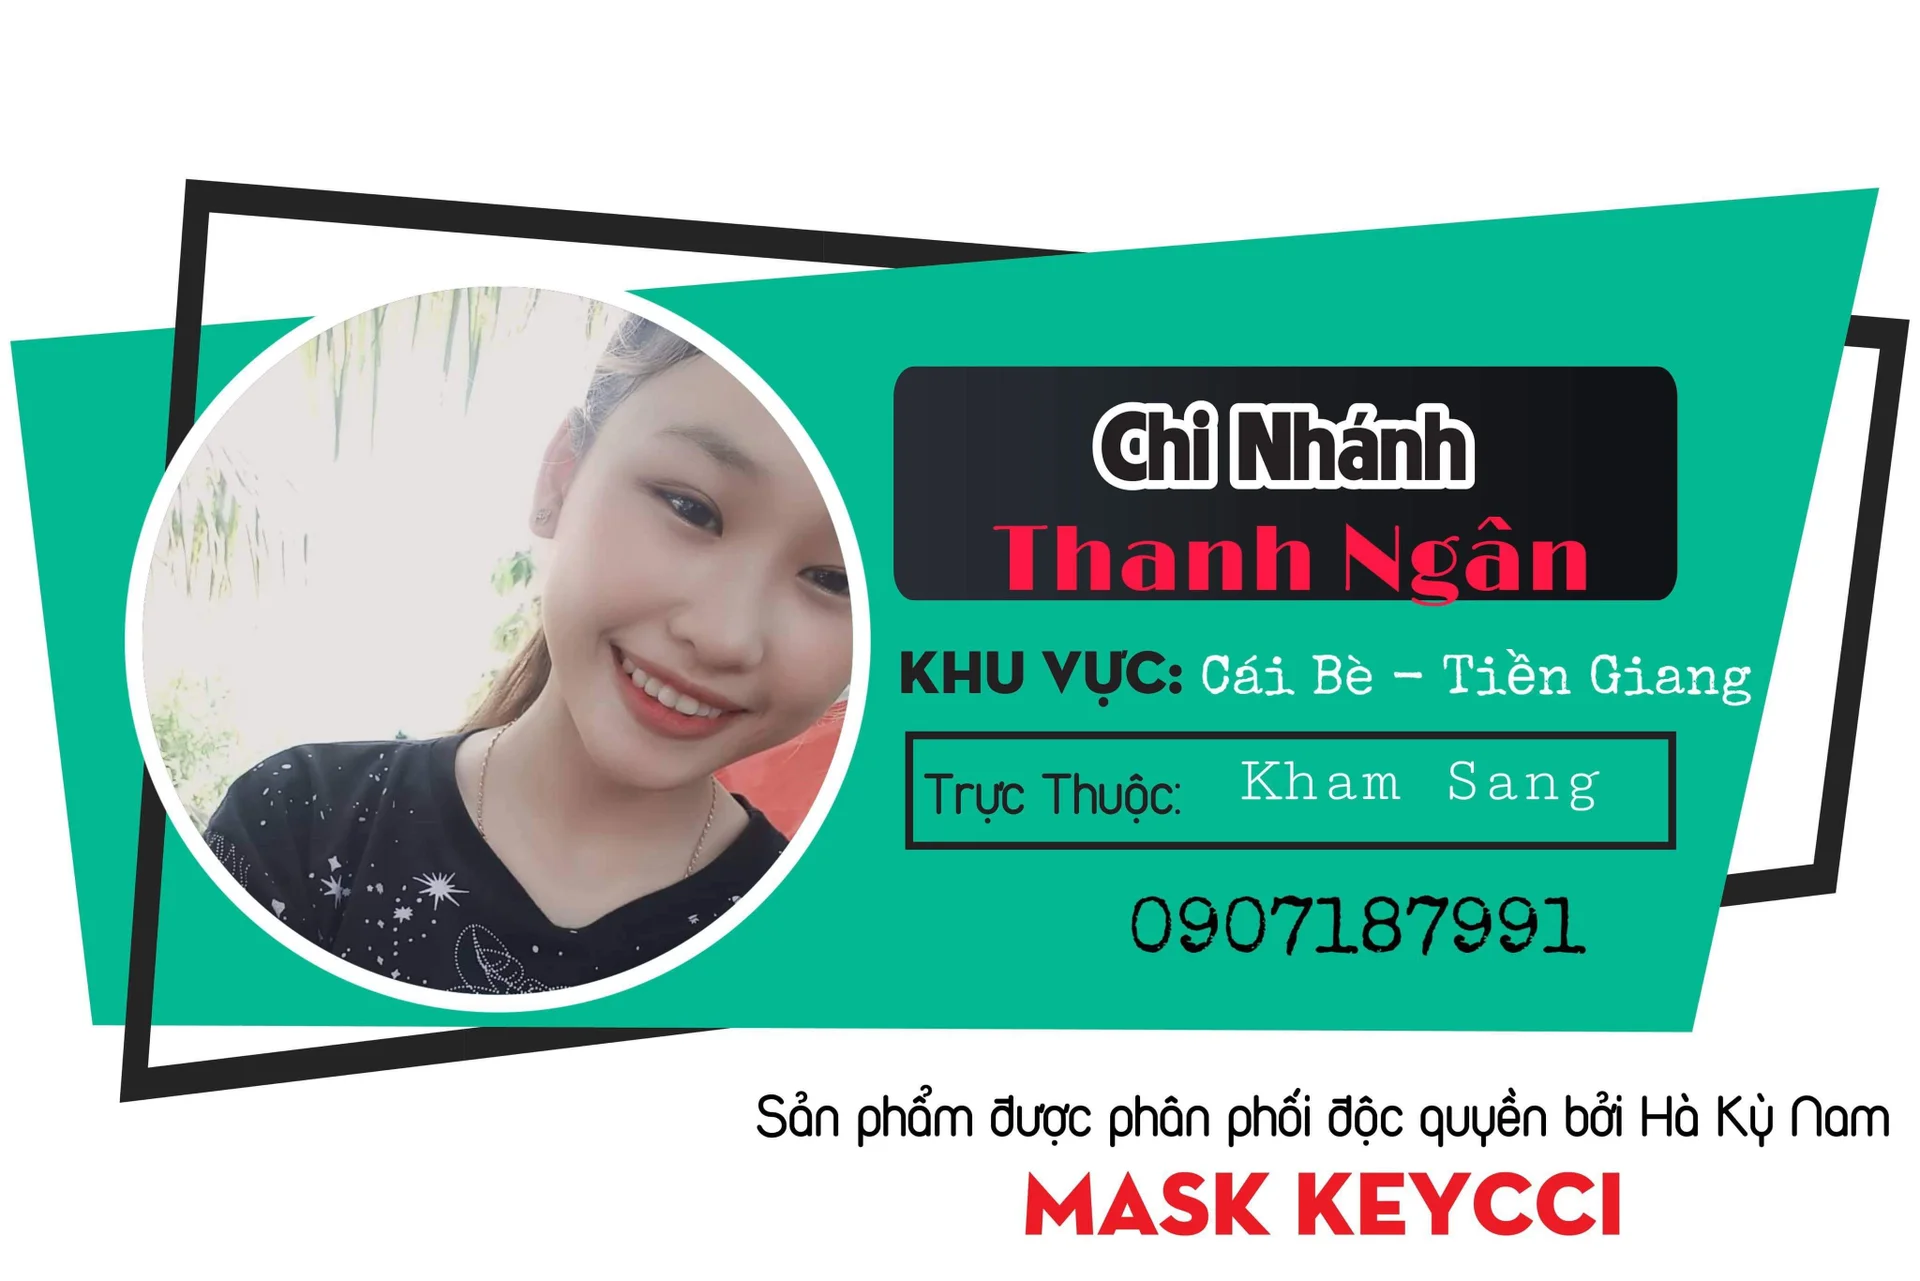 Thanh Ngân's cover photo